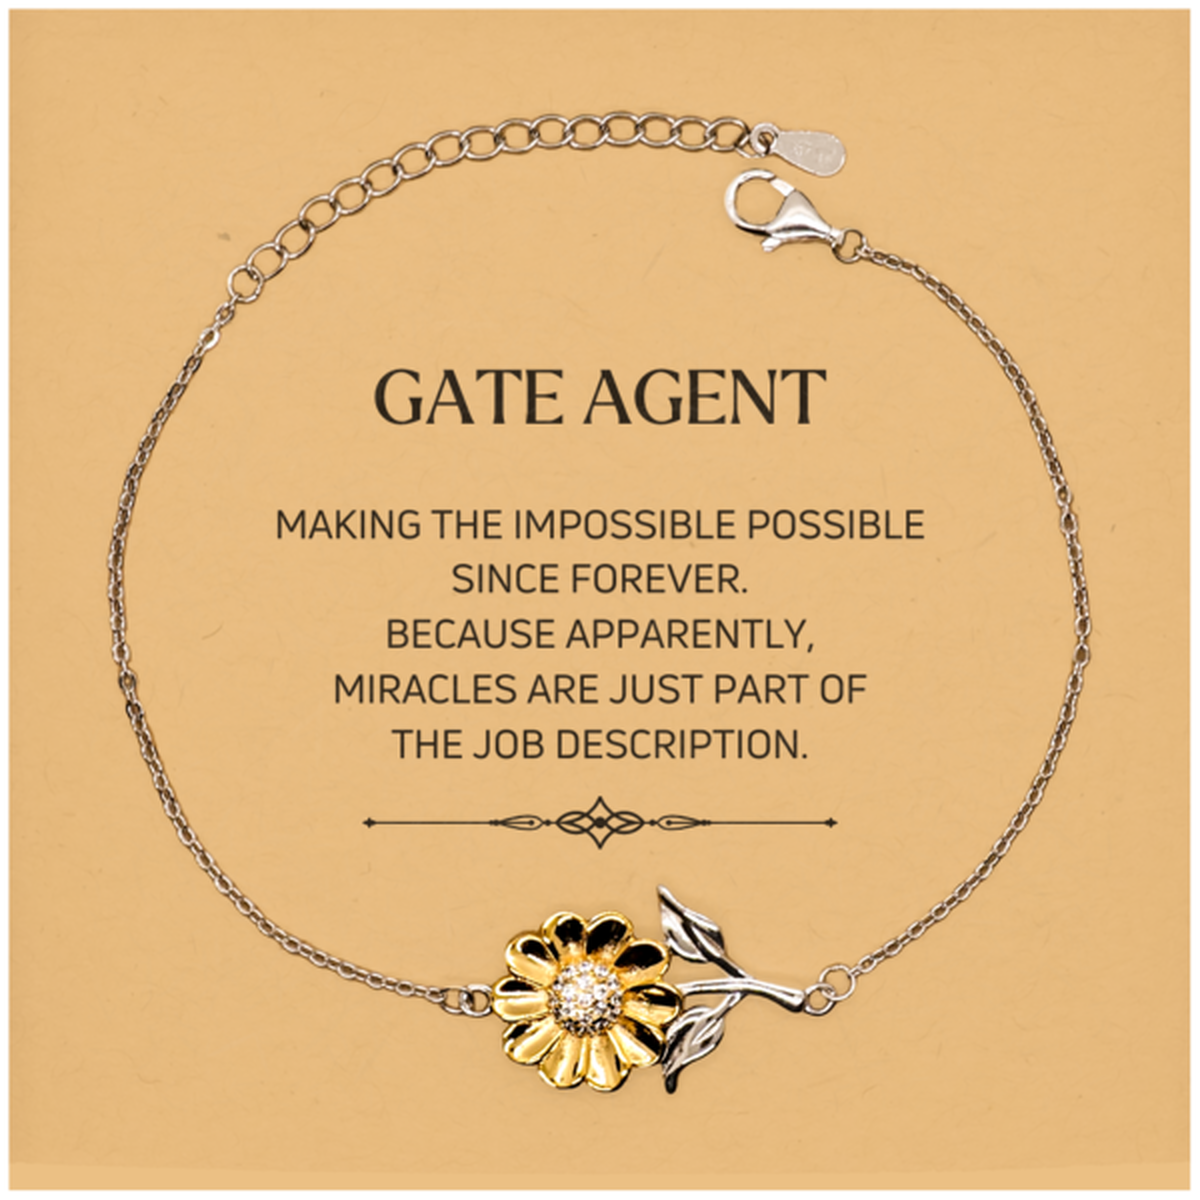 Funny Gate Agent Gifts, Miracles are just part of the job description, Inspirational Birthday Christmas Sunflower Bracelet For Gate Agent, Men, Women, Coworkers, Friends, Boss